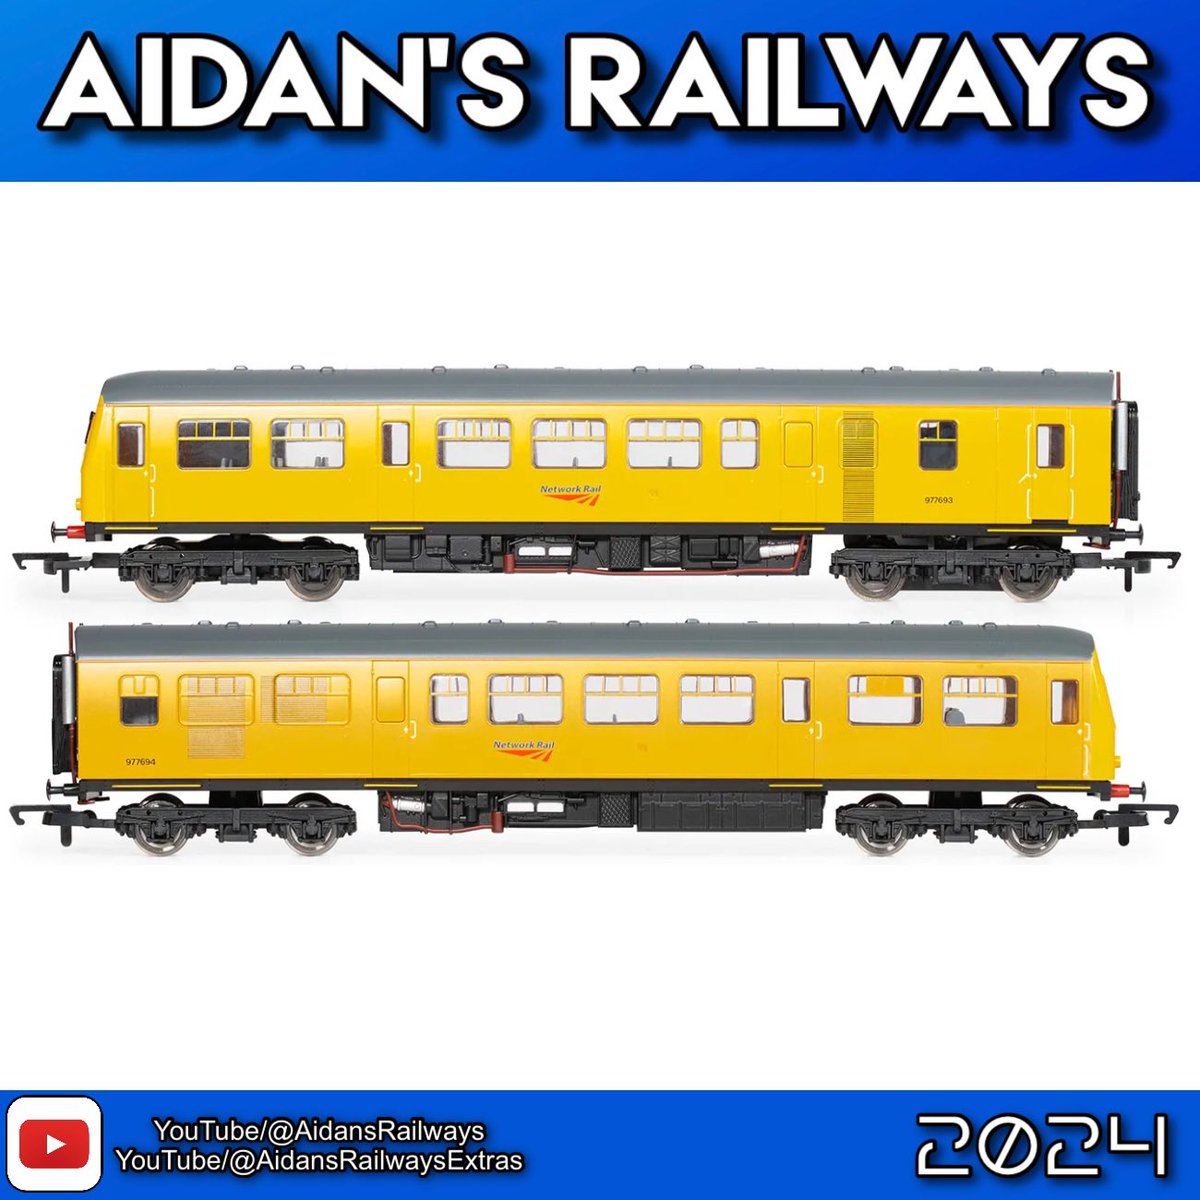 RailRoad Plus Network Rail, Class 960, Bo-Bo, 901002 'Iris 2' - Era 8

Purchase yours here 👉: prf.hn/l/BJl9wzJ

Constructed in Birmingham, the Class 101 DMU was one of the longest lasting DMUs to ever see service in the UK.

#modelrailway #modeltrains #trains #railway